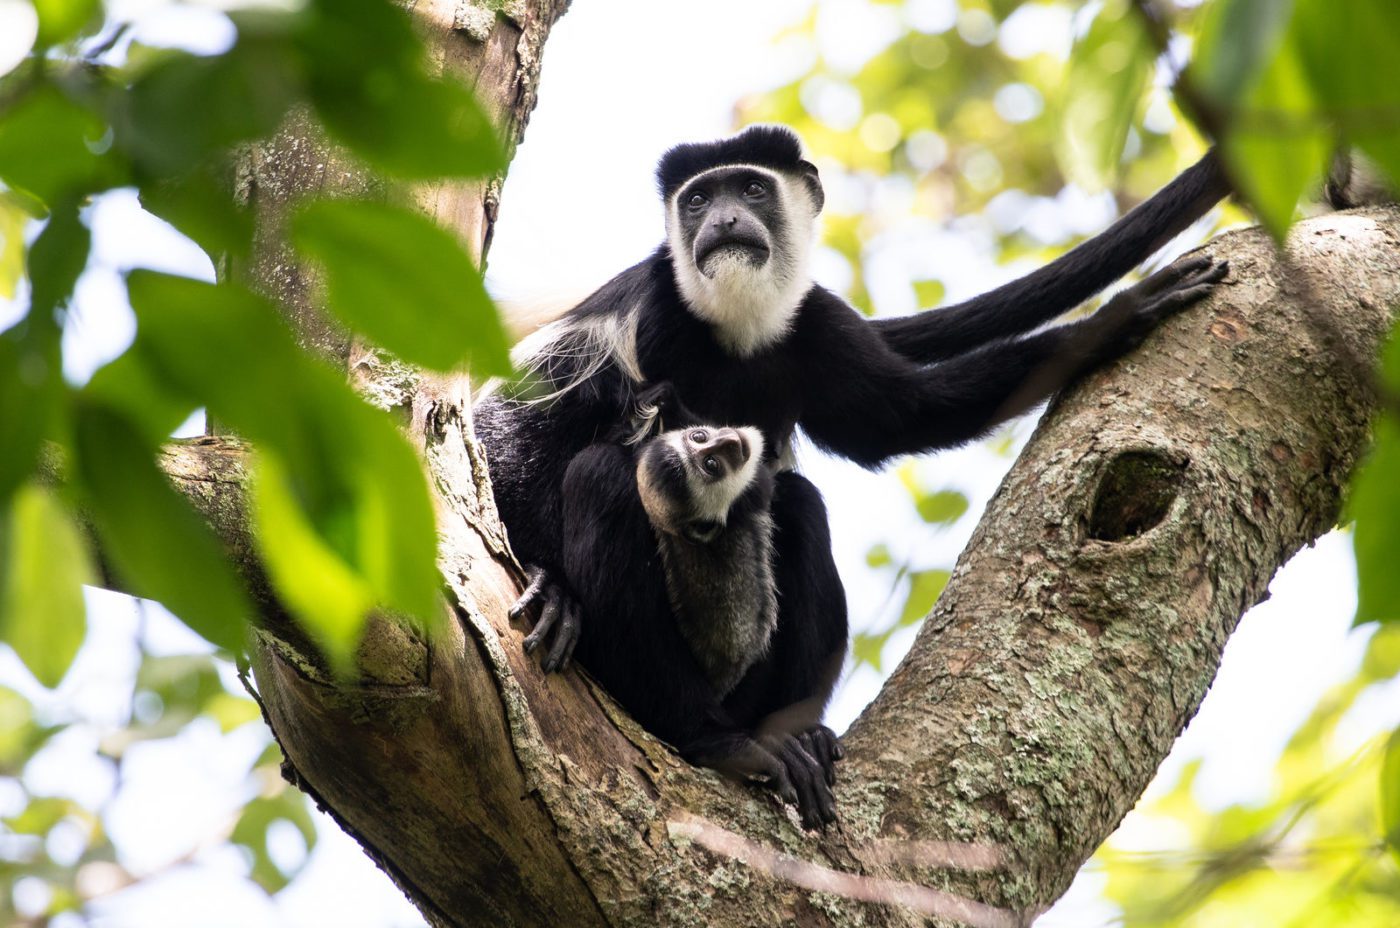 An image of colobus monkeys in a tree